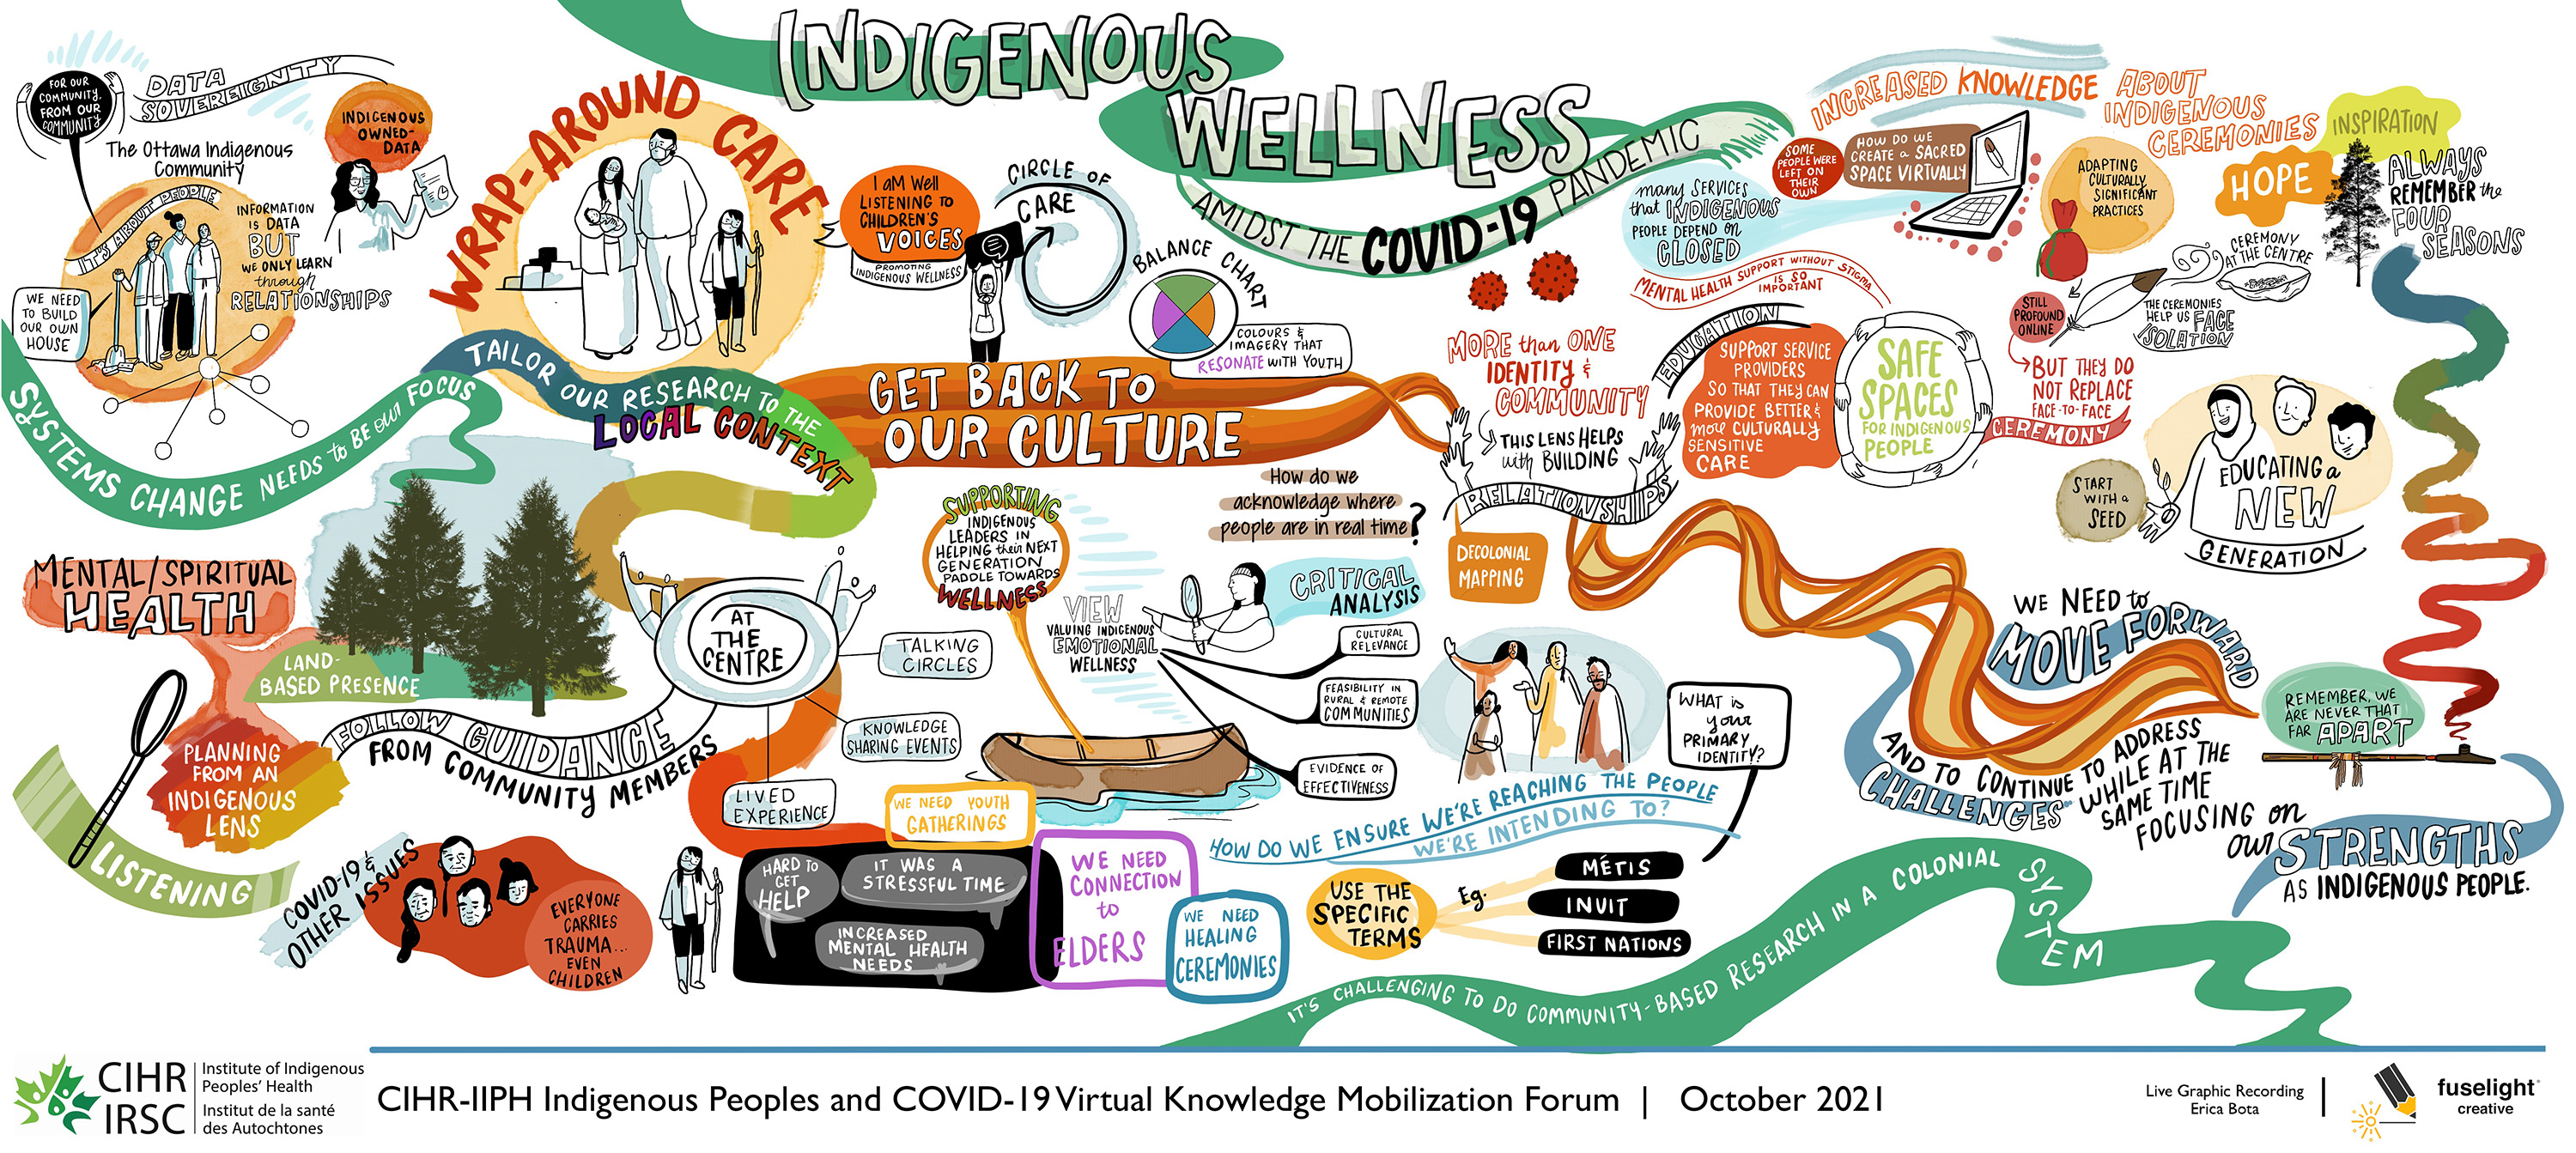 Day 1: Indigenous wellness amidst the COVID-19 pandemic